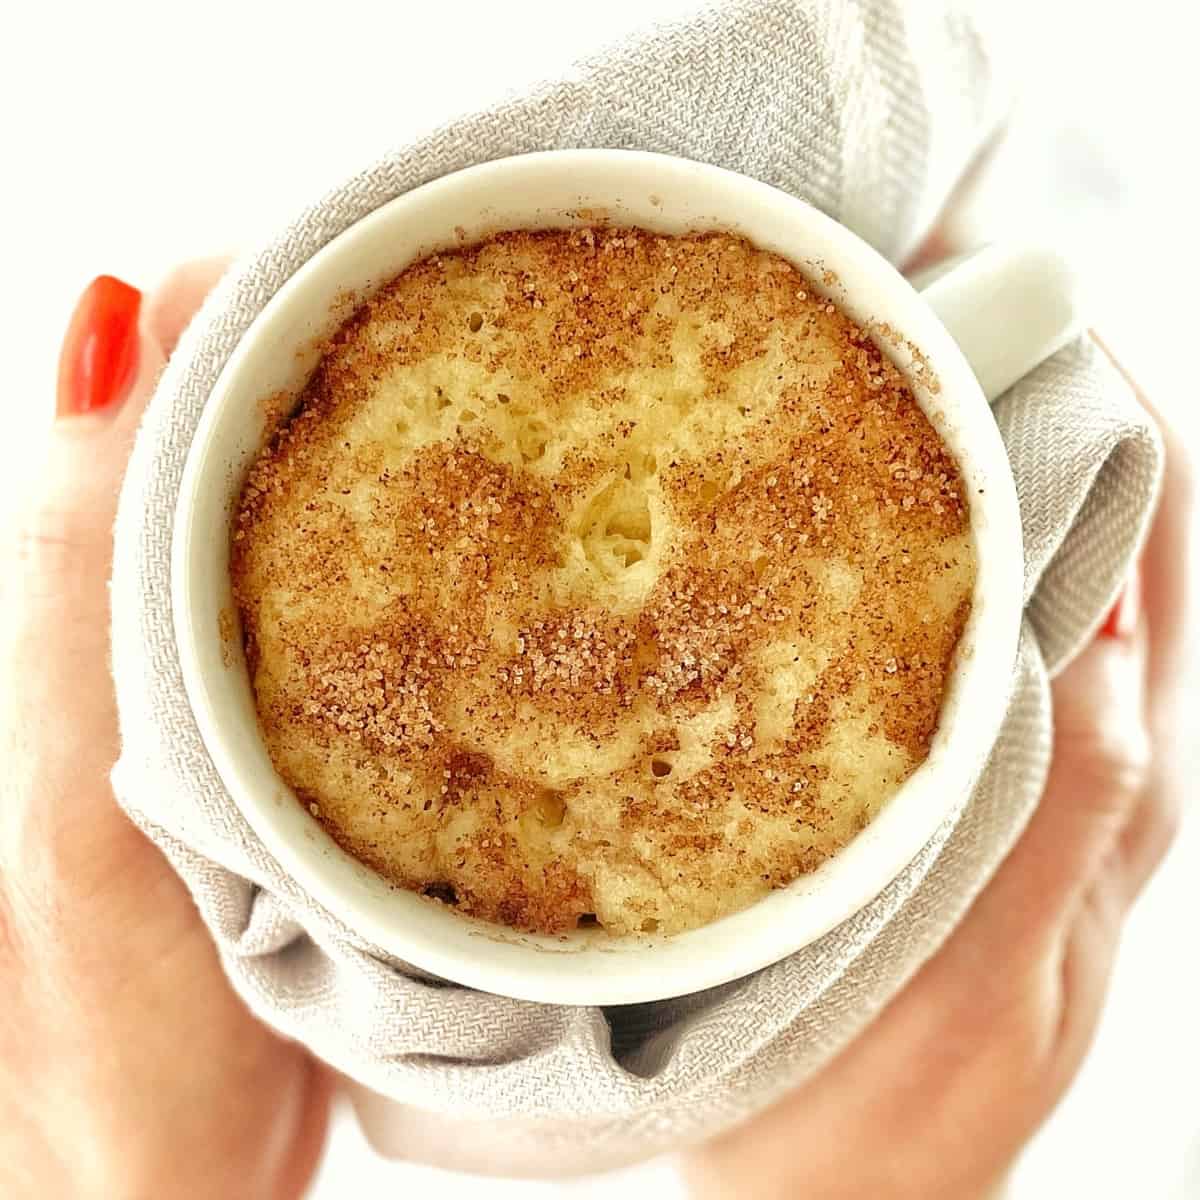 top down photograph of snickerdoodle cake in a white mug being held by two hands with a tea towel.